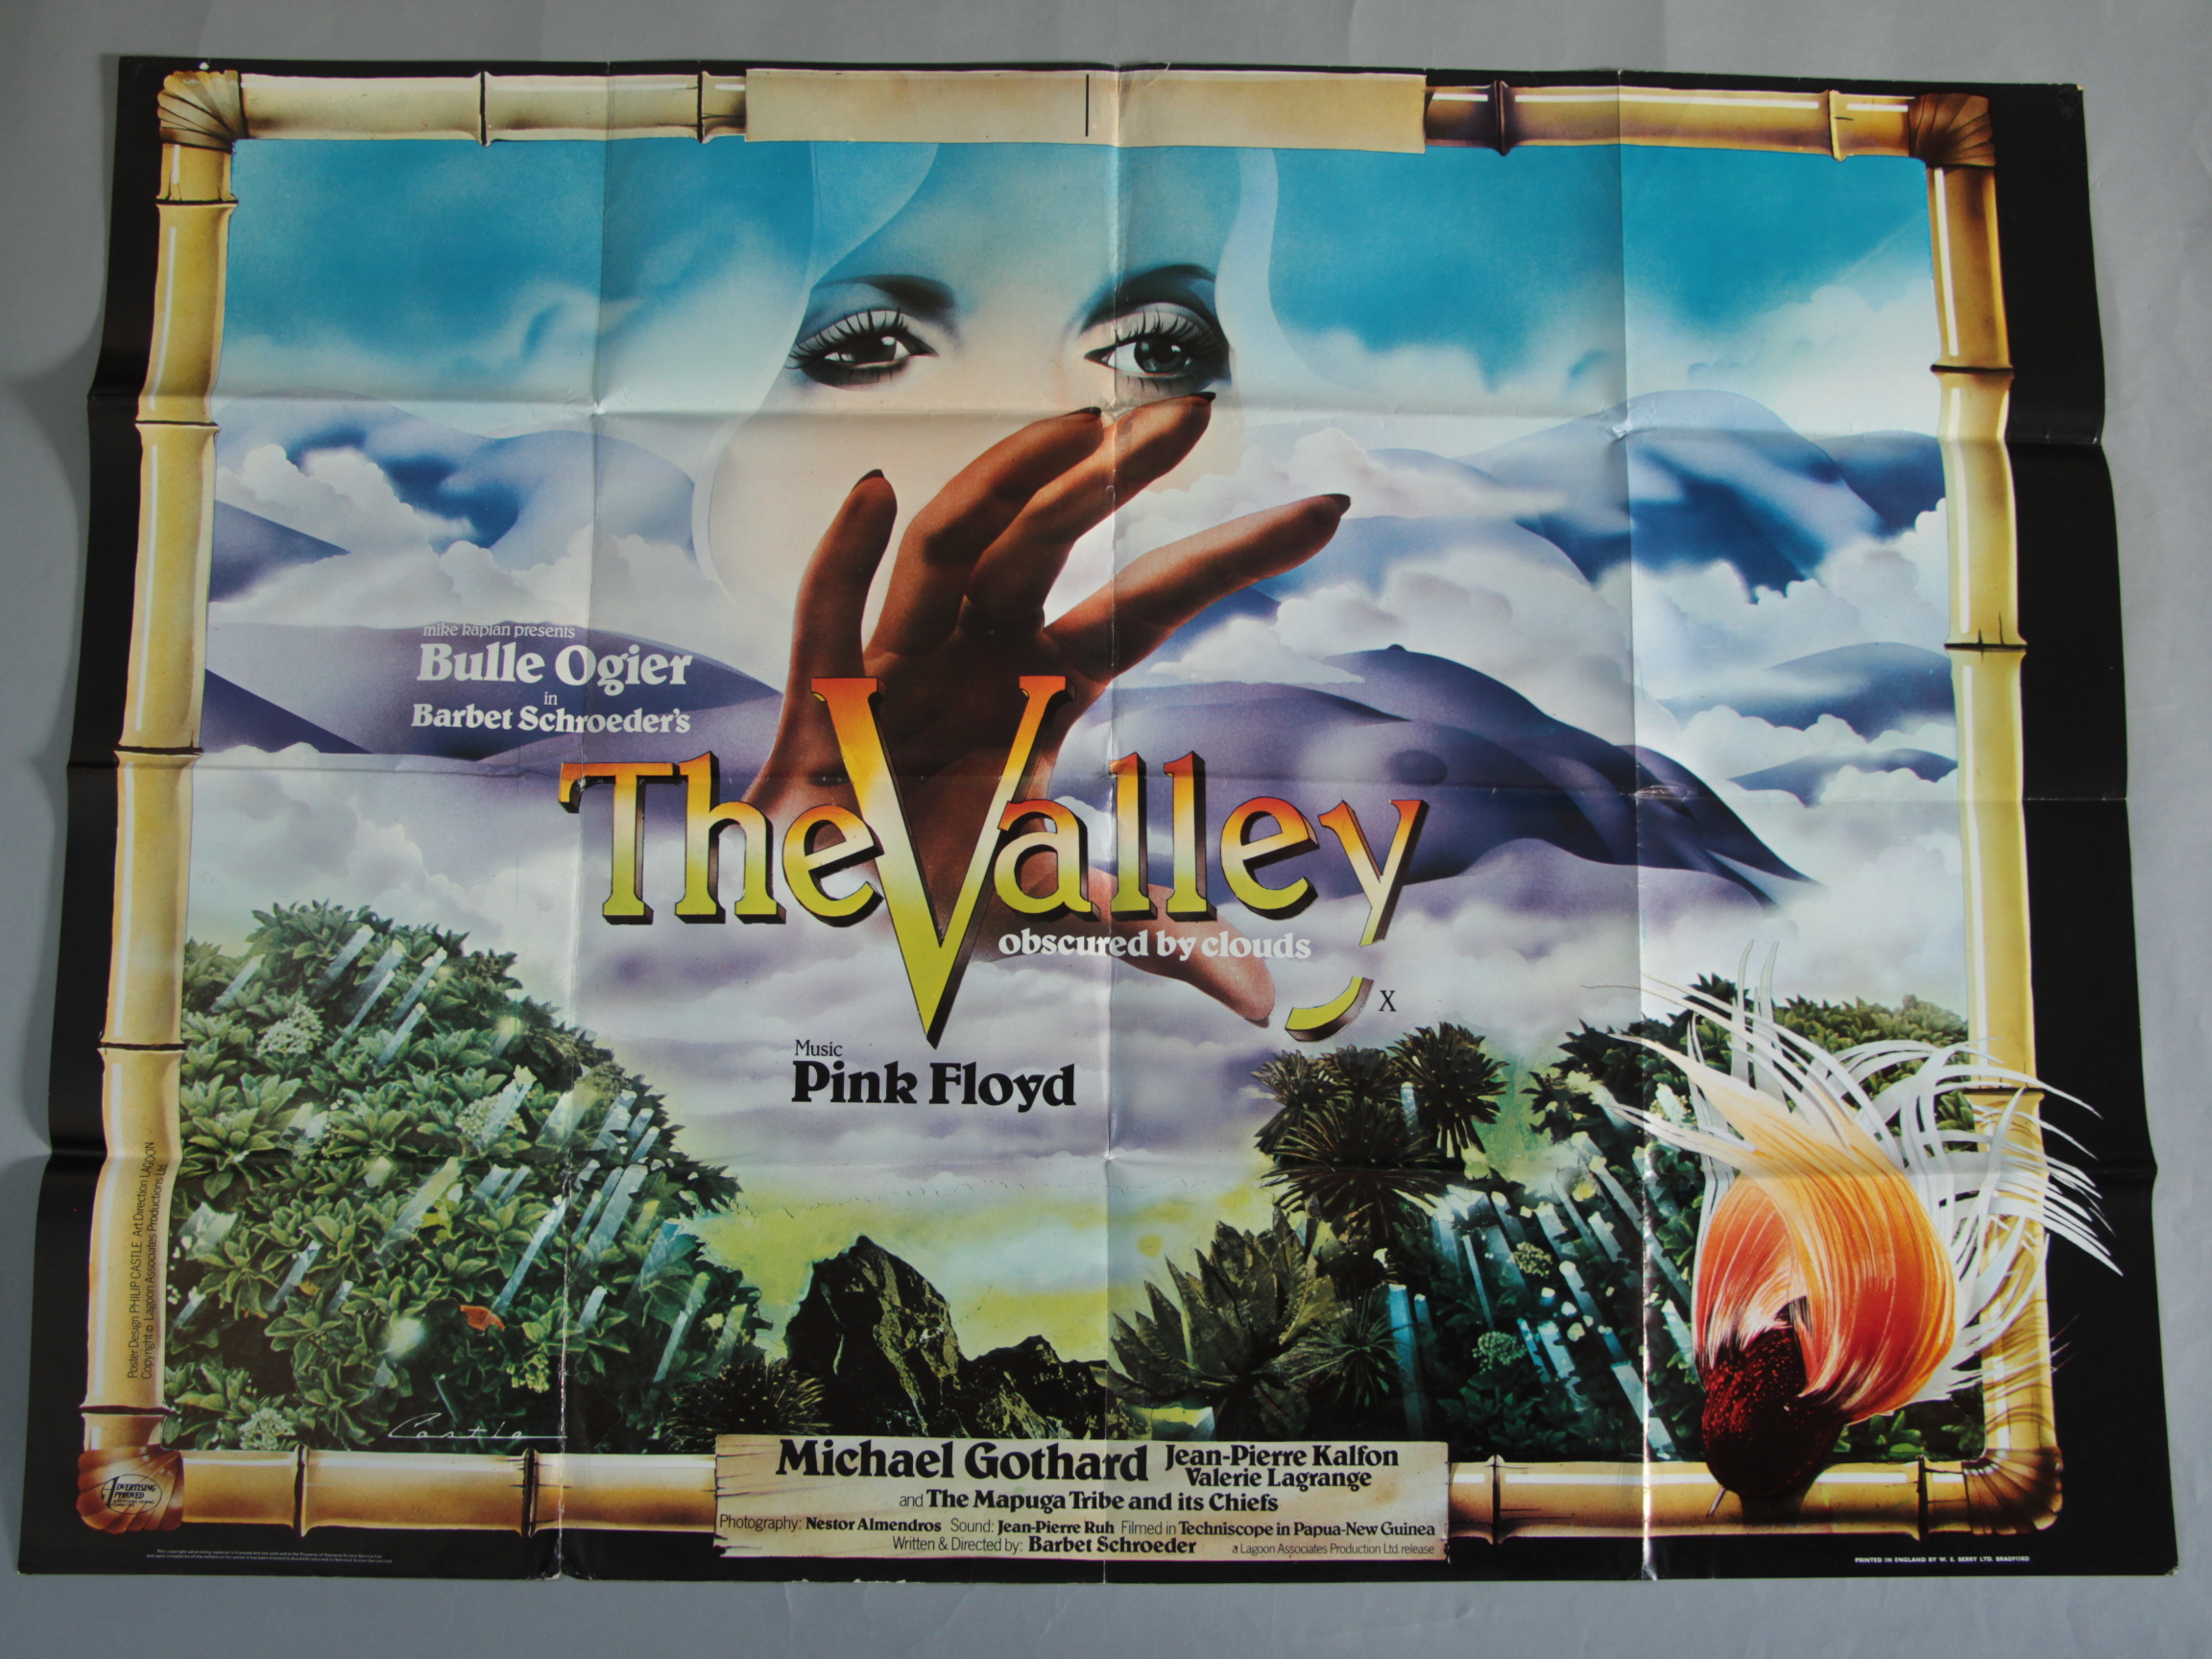 The Valley British Quad Film Poster 30"x40" Pink Floyd music X Certificate art by Philip Castle.